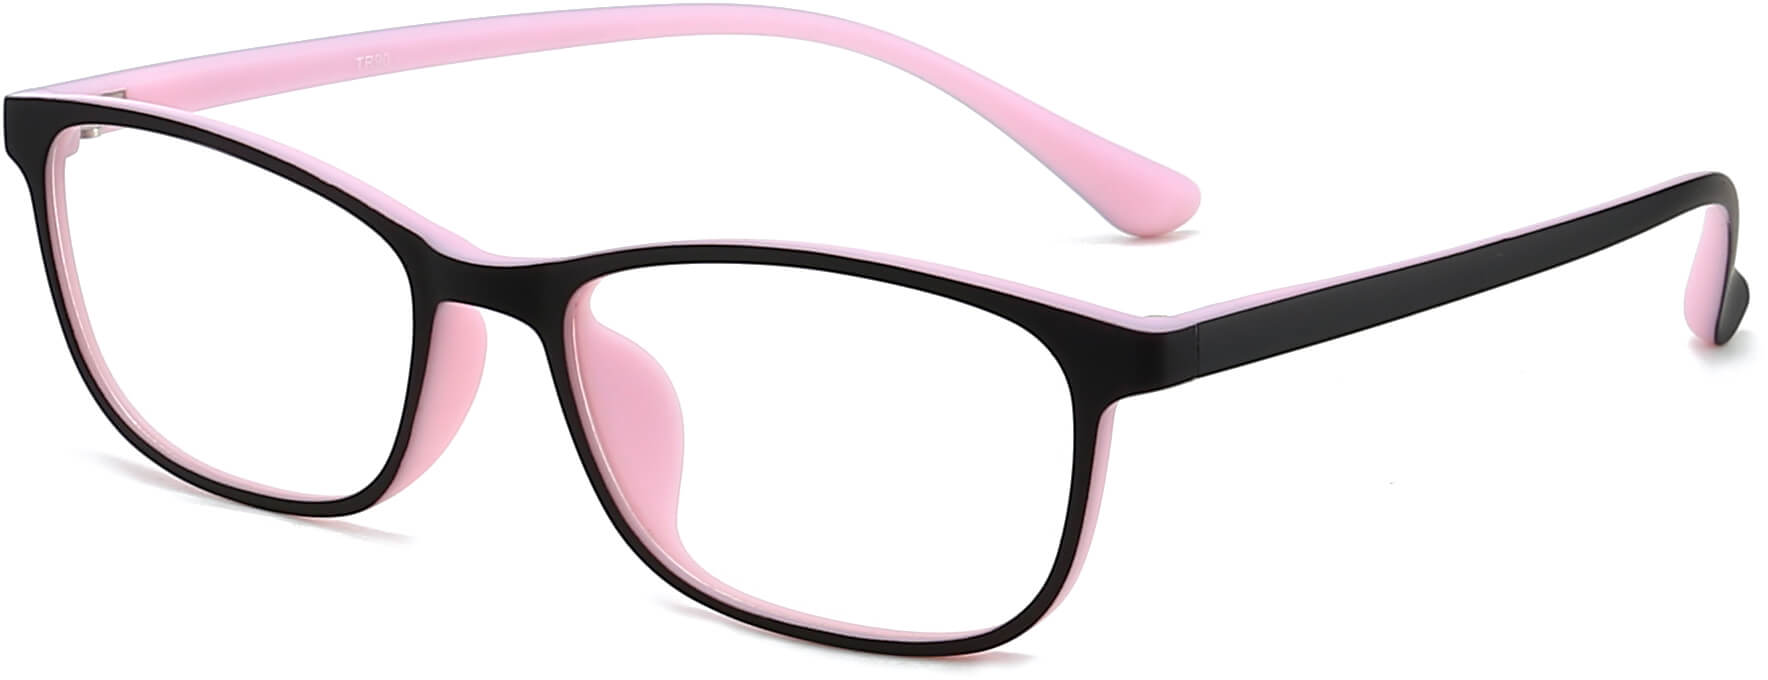 Sophia Rectangle Black Eyeglasses from ANRRI from ANRRI, angle view